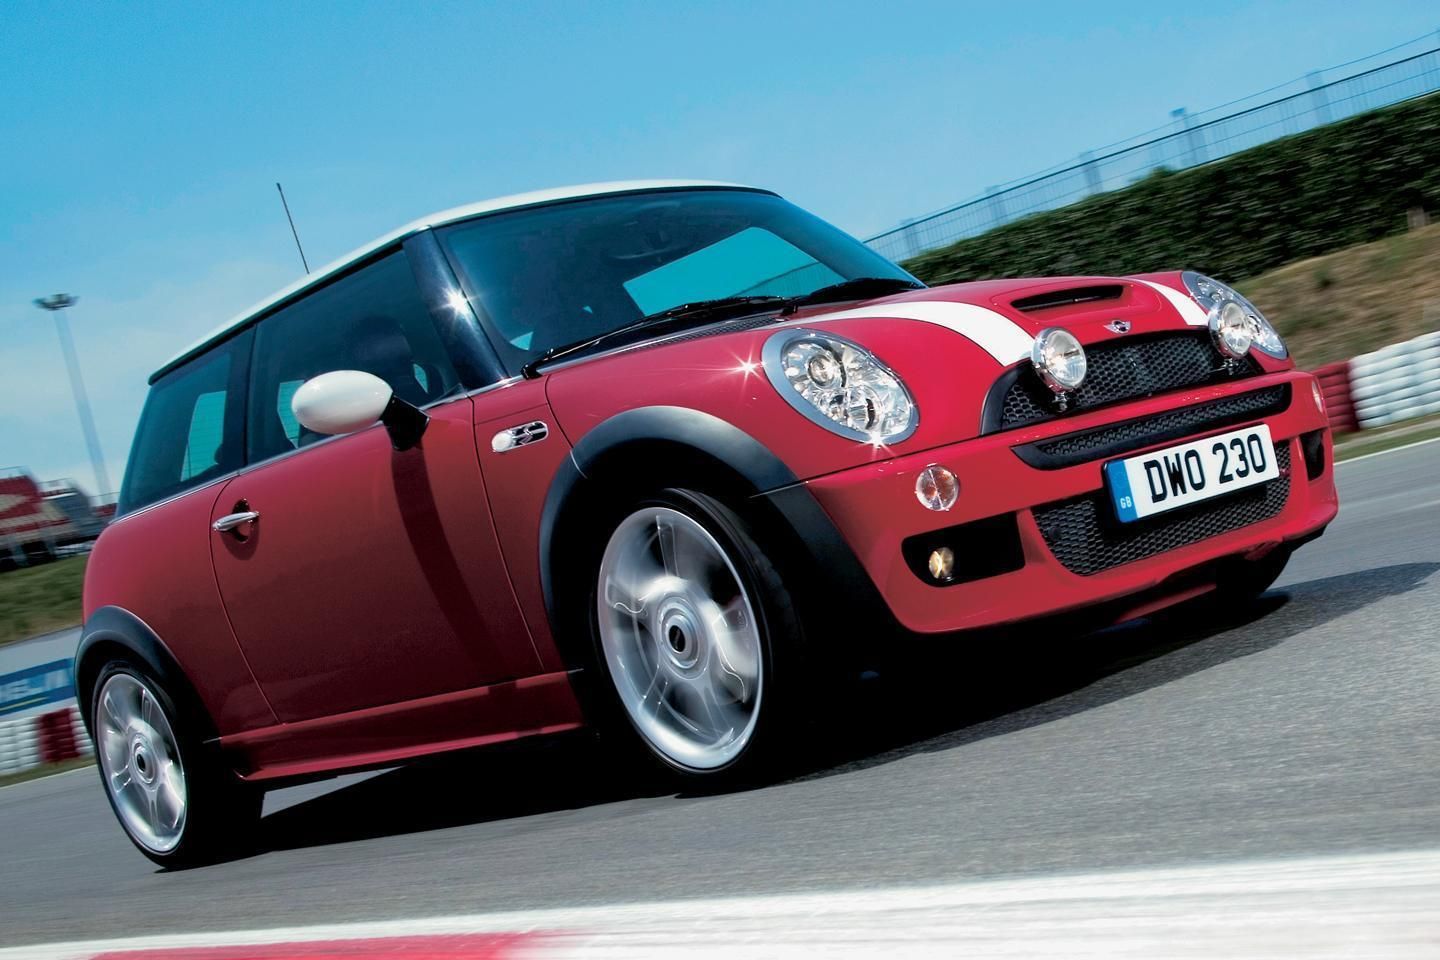 Mini Cooper S - Everything You Need to Know Before Buying a Mini Cooper S  R53